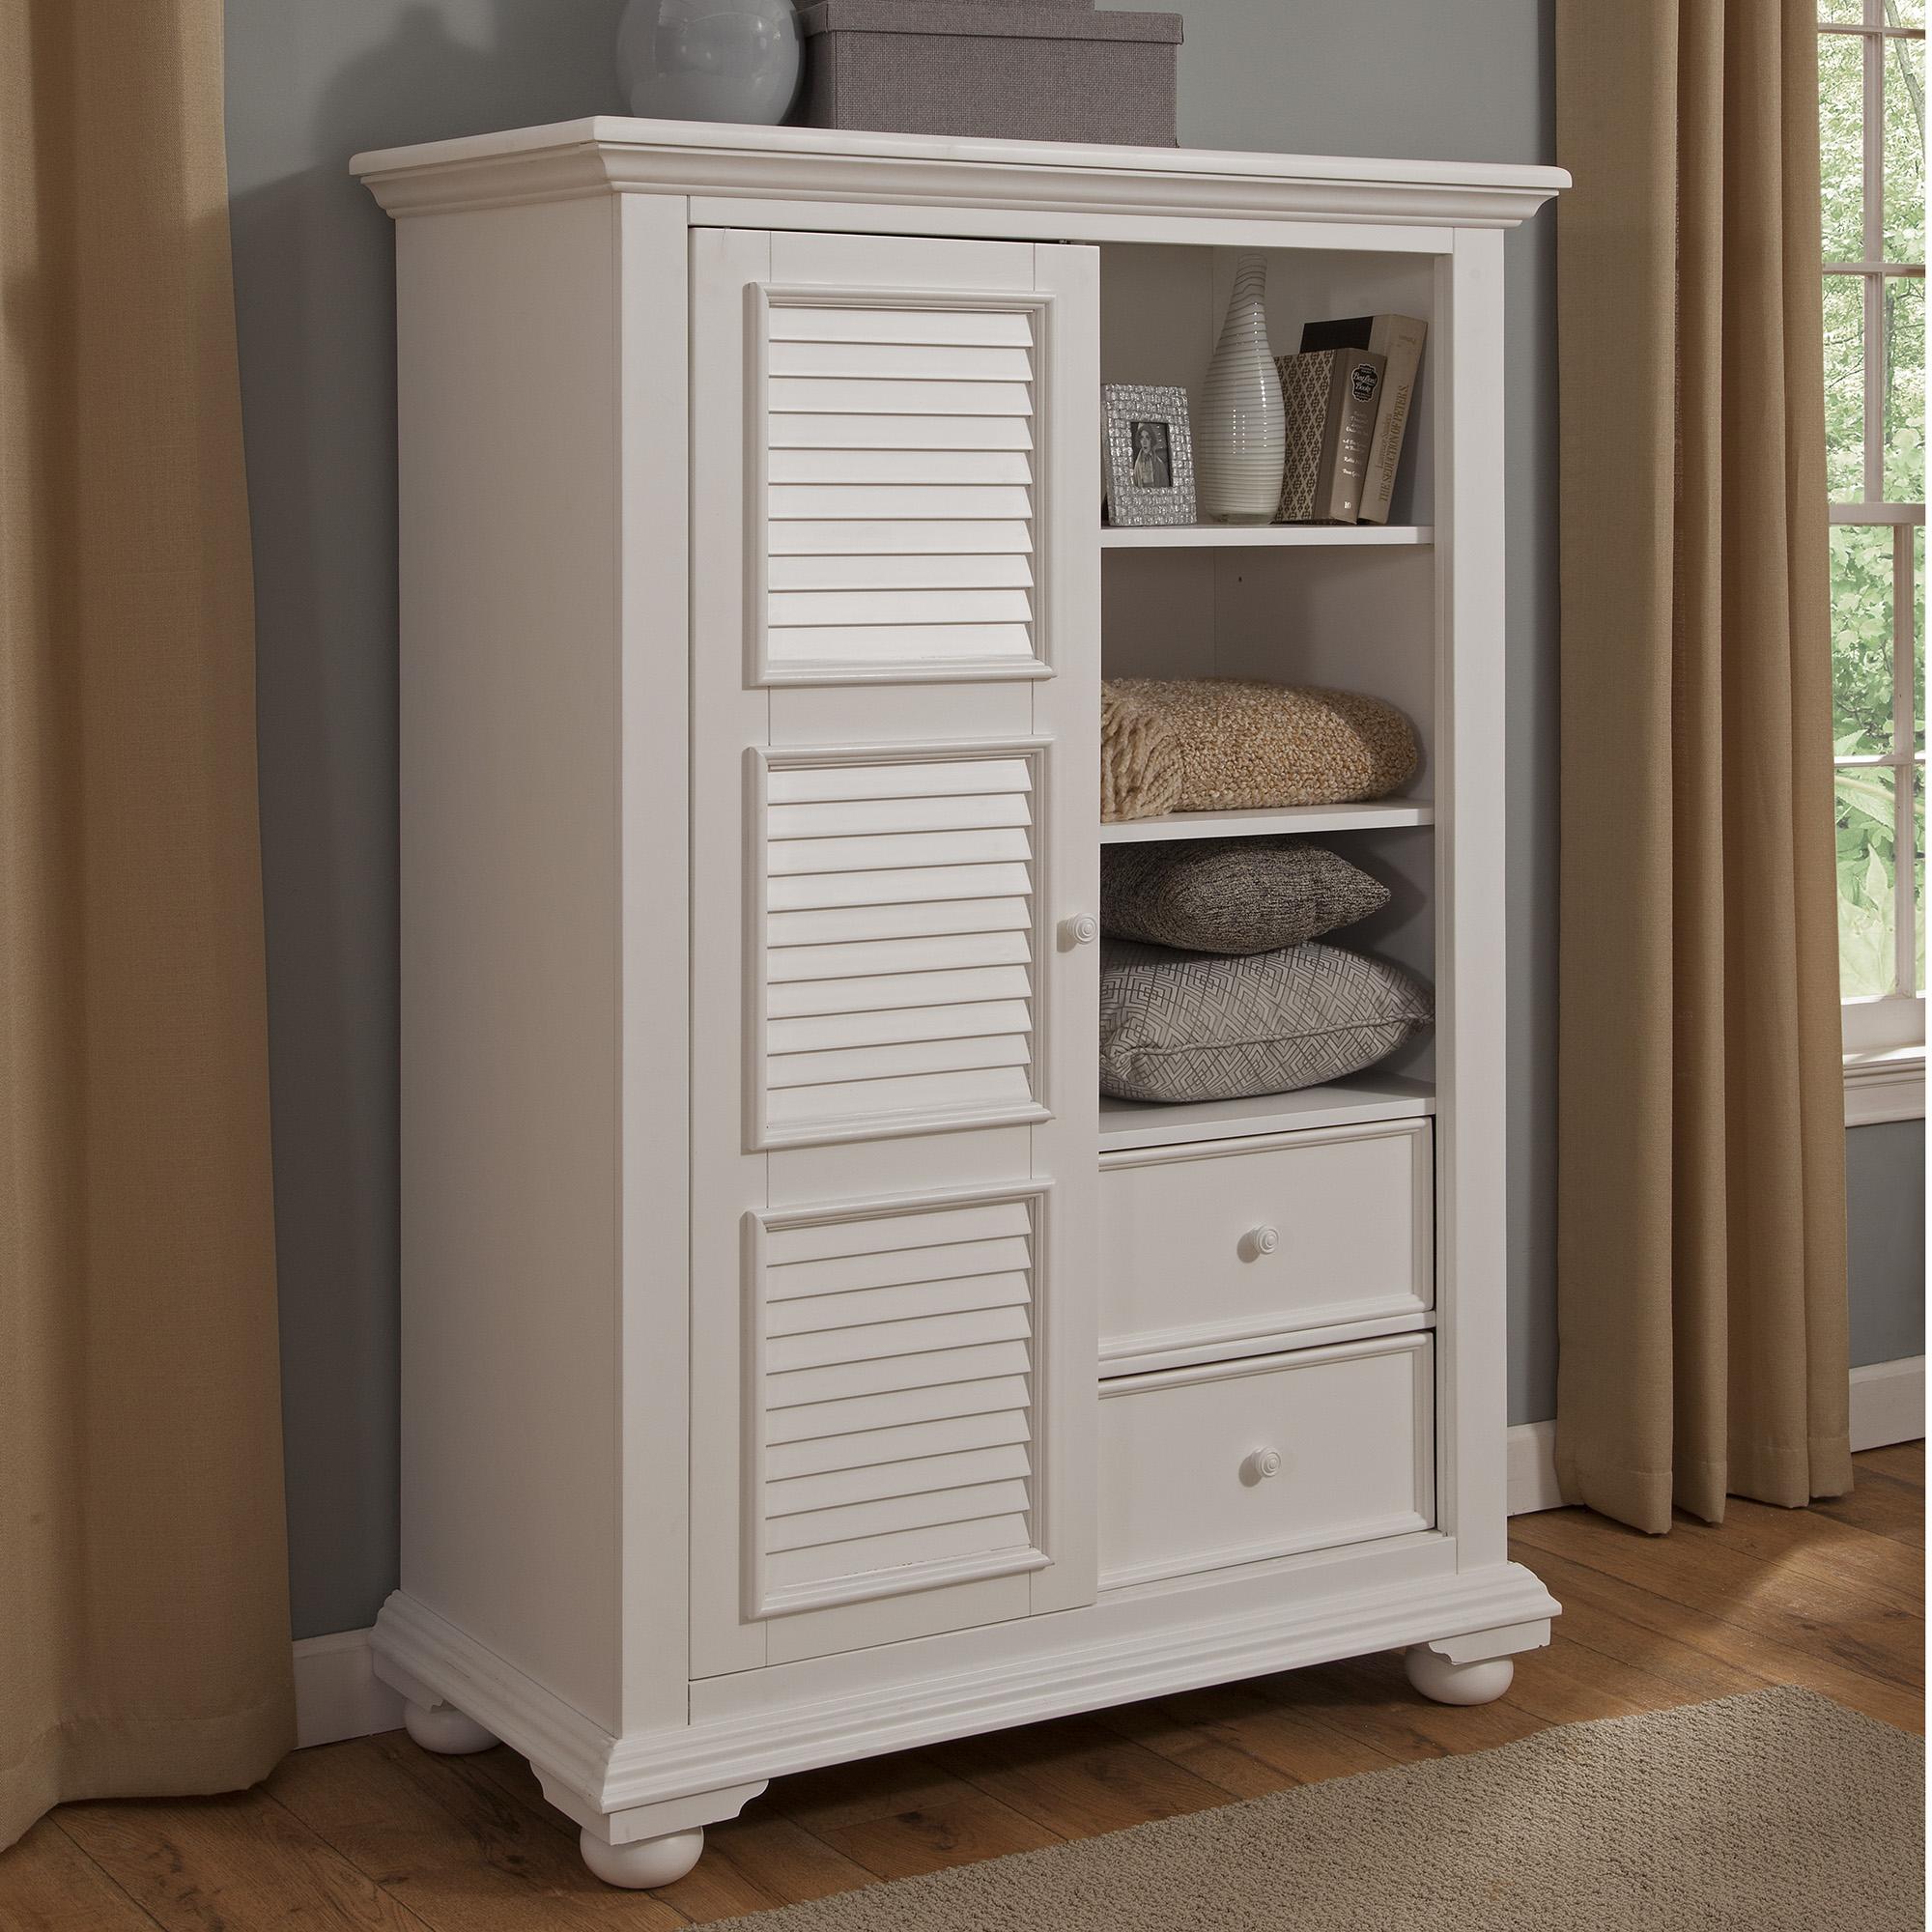 

    
American Woodcrafters COTTAGE 6510-181 Chest White 6510-181
